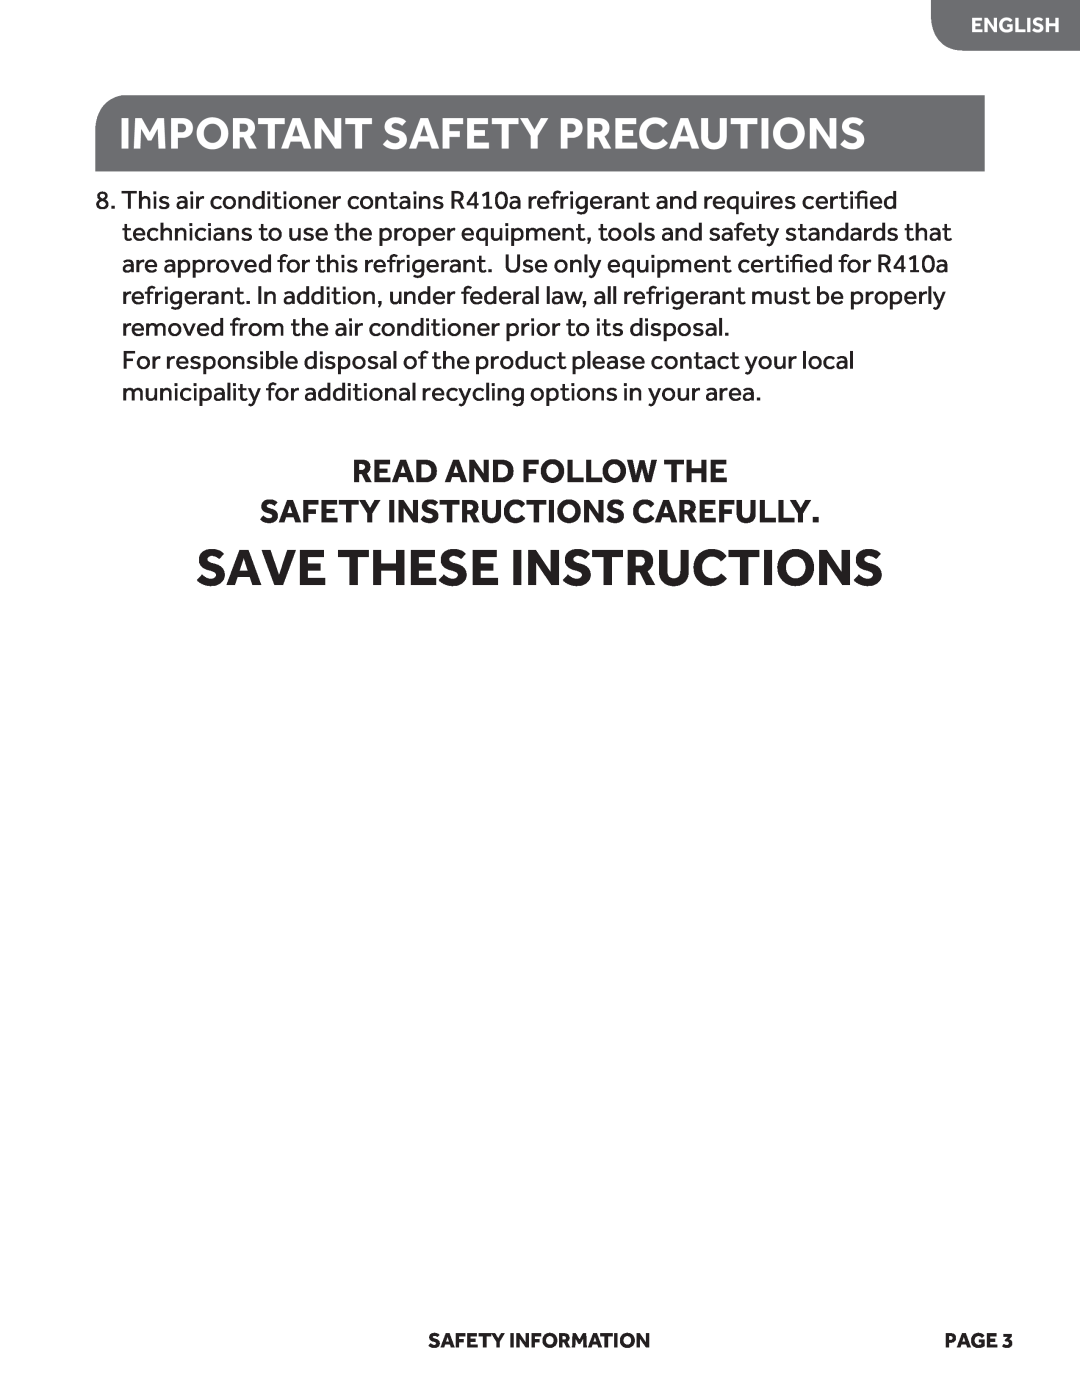 Haier HWF05XCL Save These Instructions, Read And Follow The Safety Instructions Carefully, Important Safety Precautions 